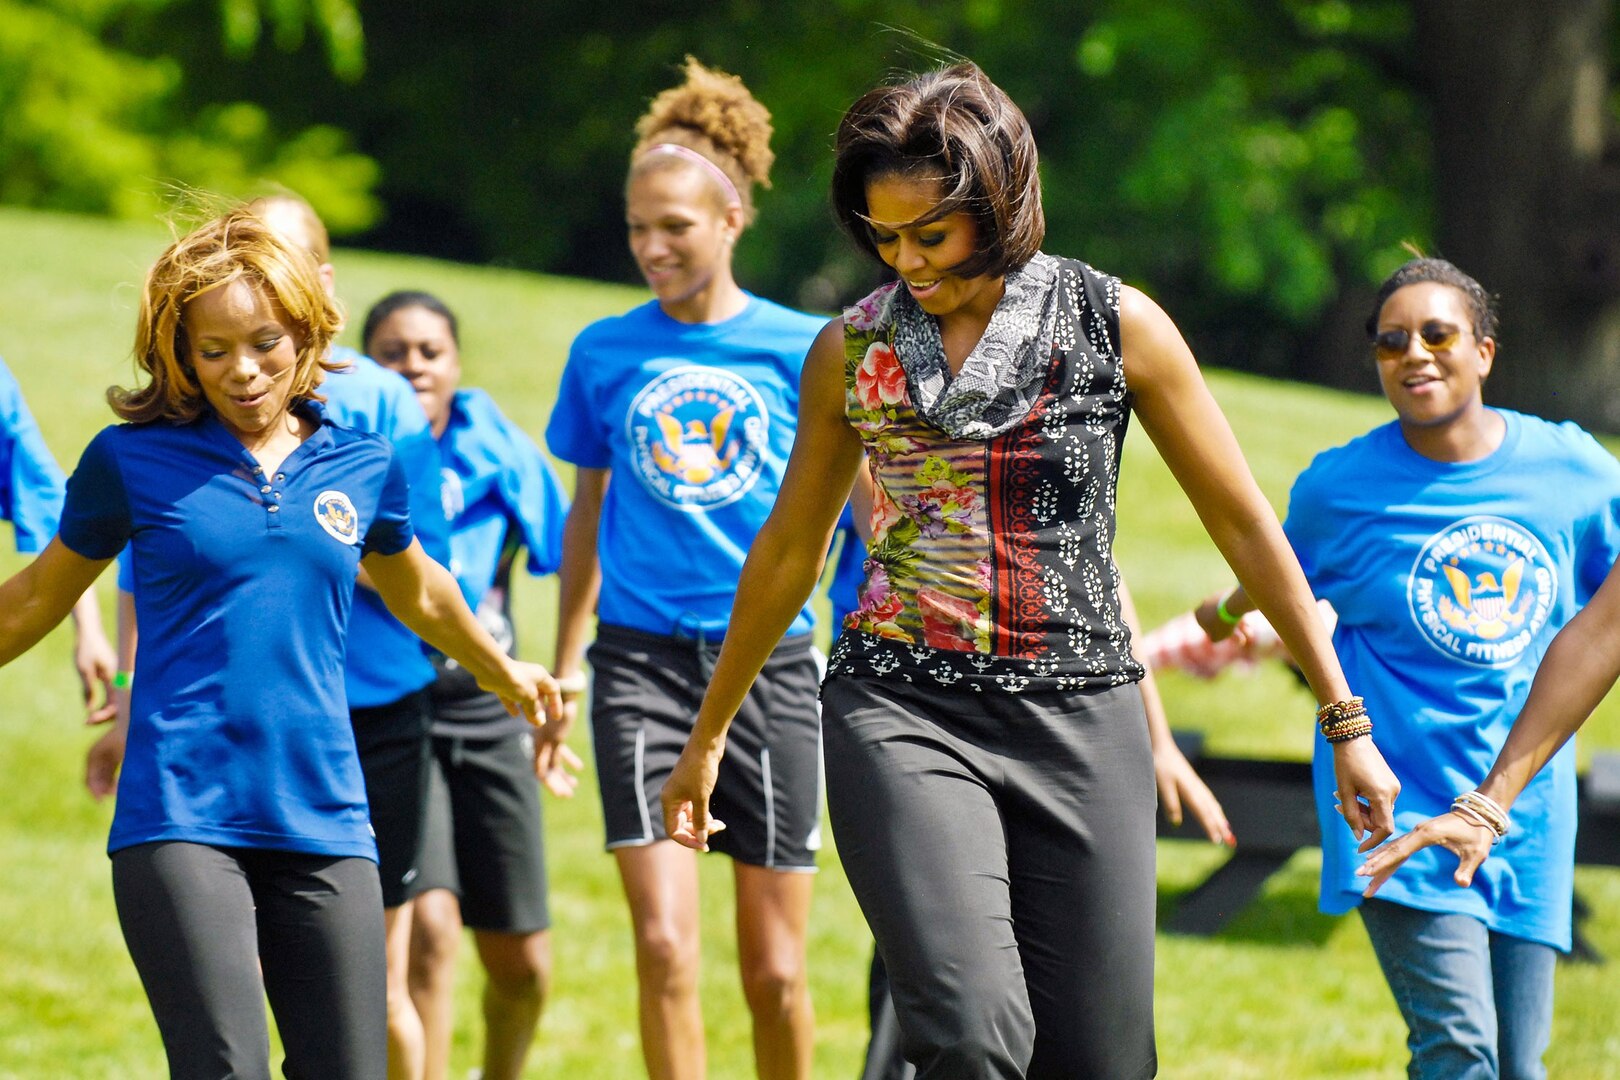 First Lady Michelle Obama shows off her dance moves for National Guard and Reserve teens at a fitness and nutrition event on the White House's South Lawn, May 9, 2011. During the event, the first lady announced a new fitness industry effort to support military families, particularly Guard and Reserve families.